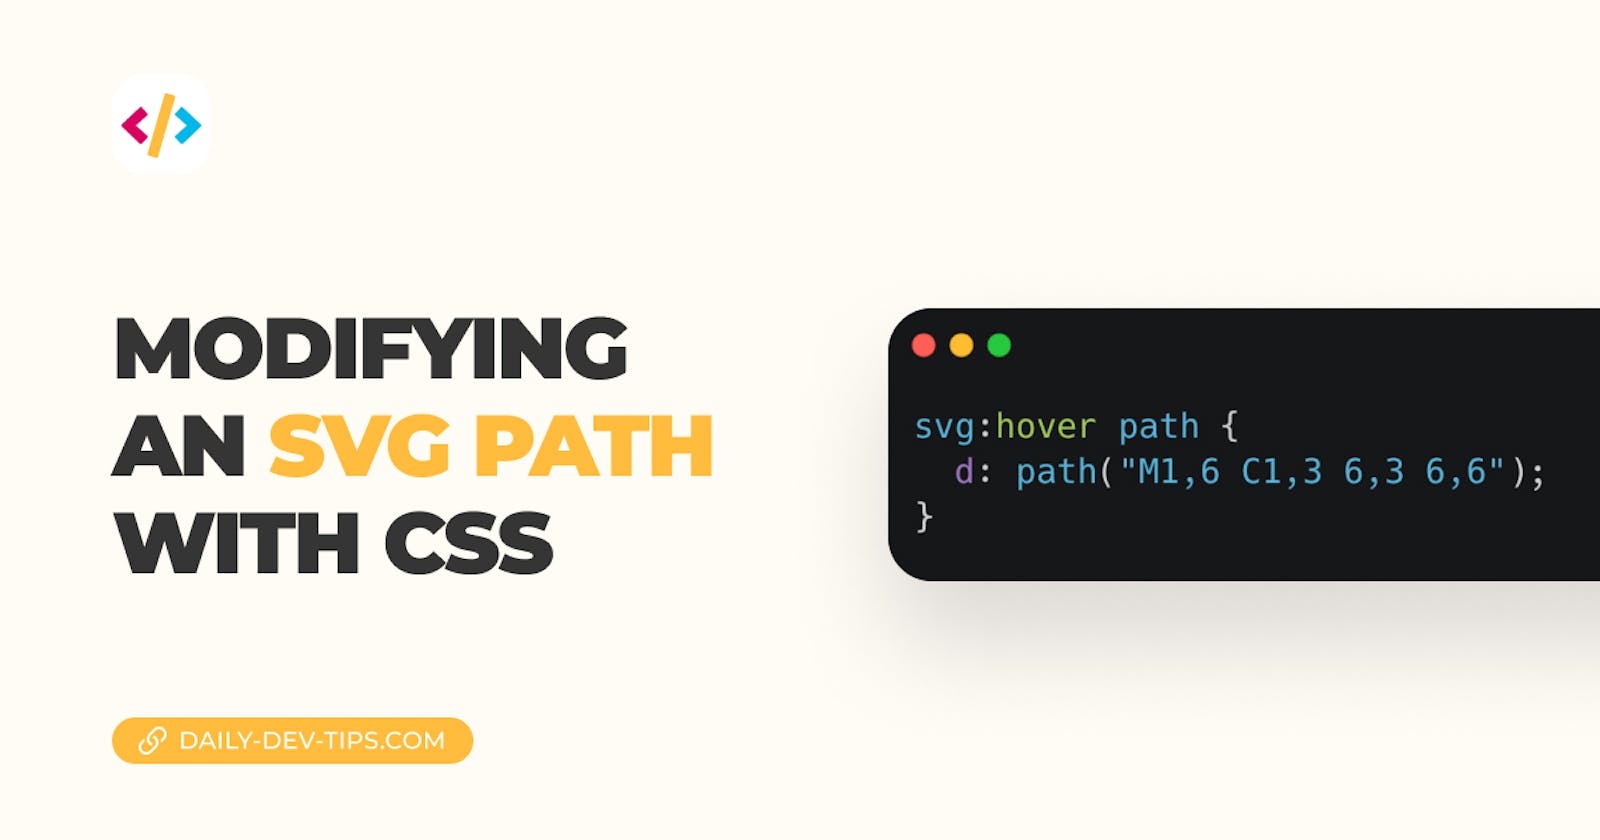 Modifying an SVG path with CSS